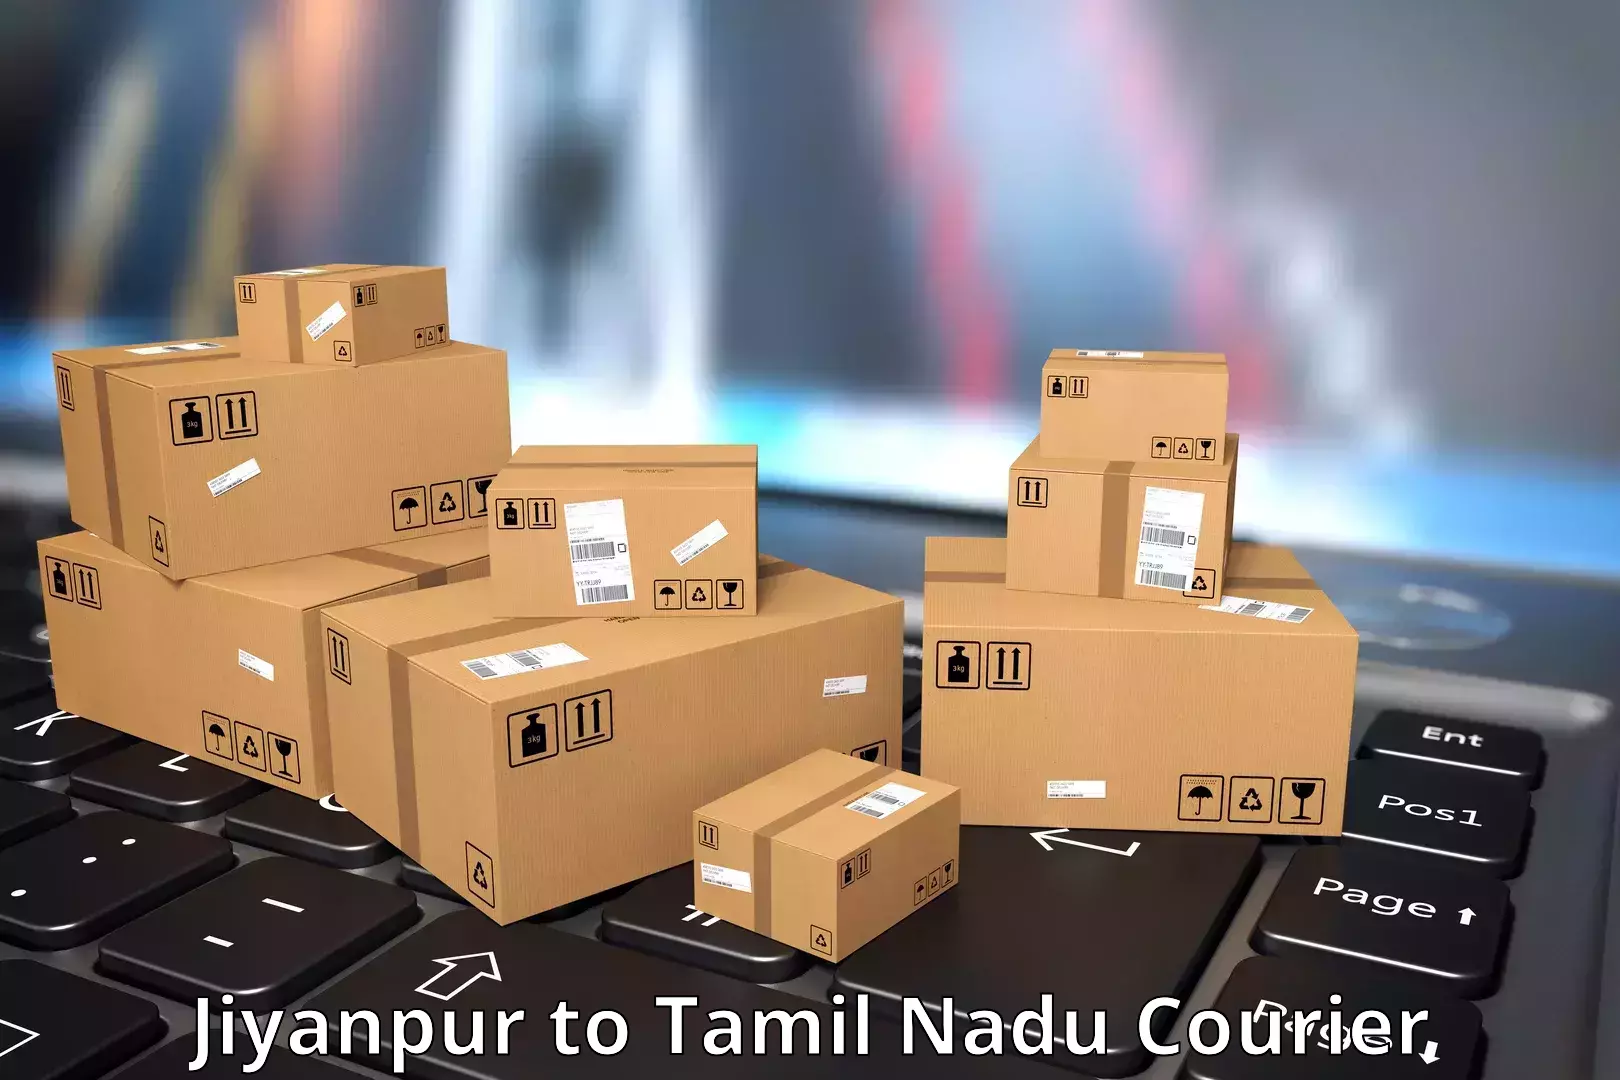 Reliable parcel services Jiyanpur to Mettupalayam